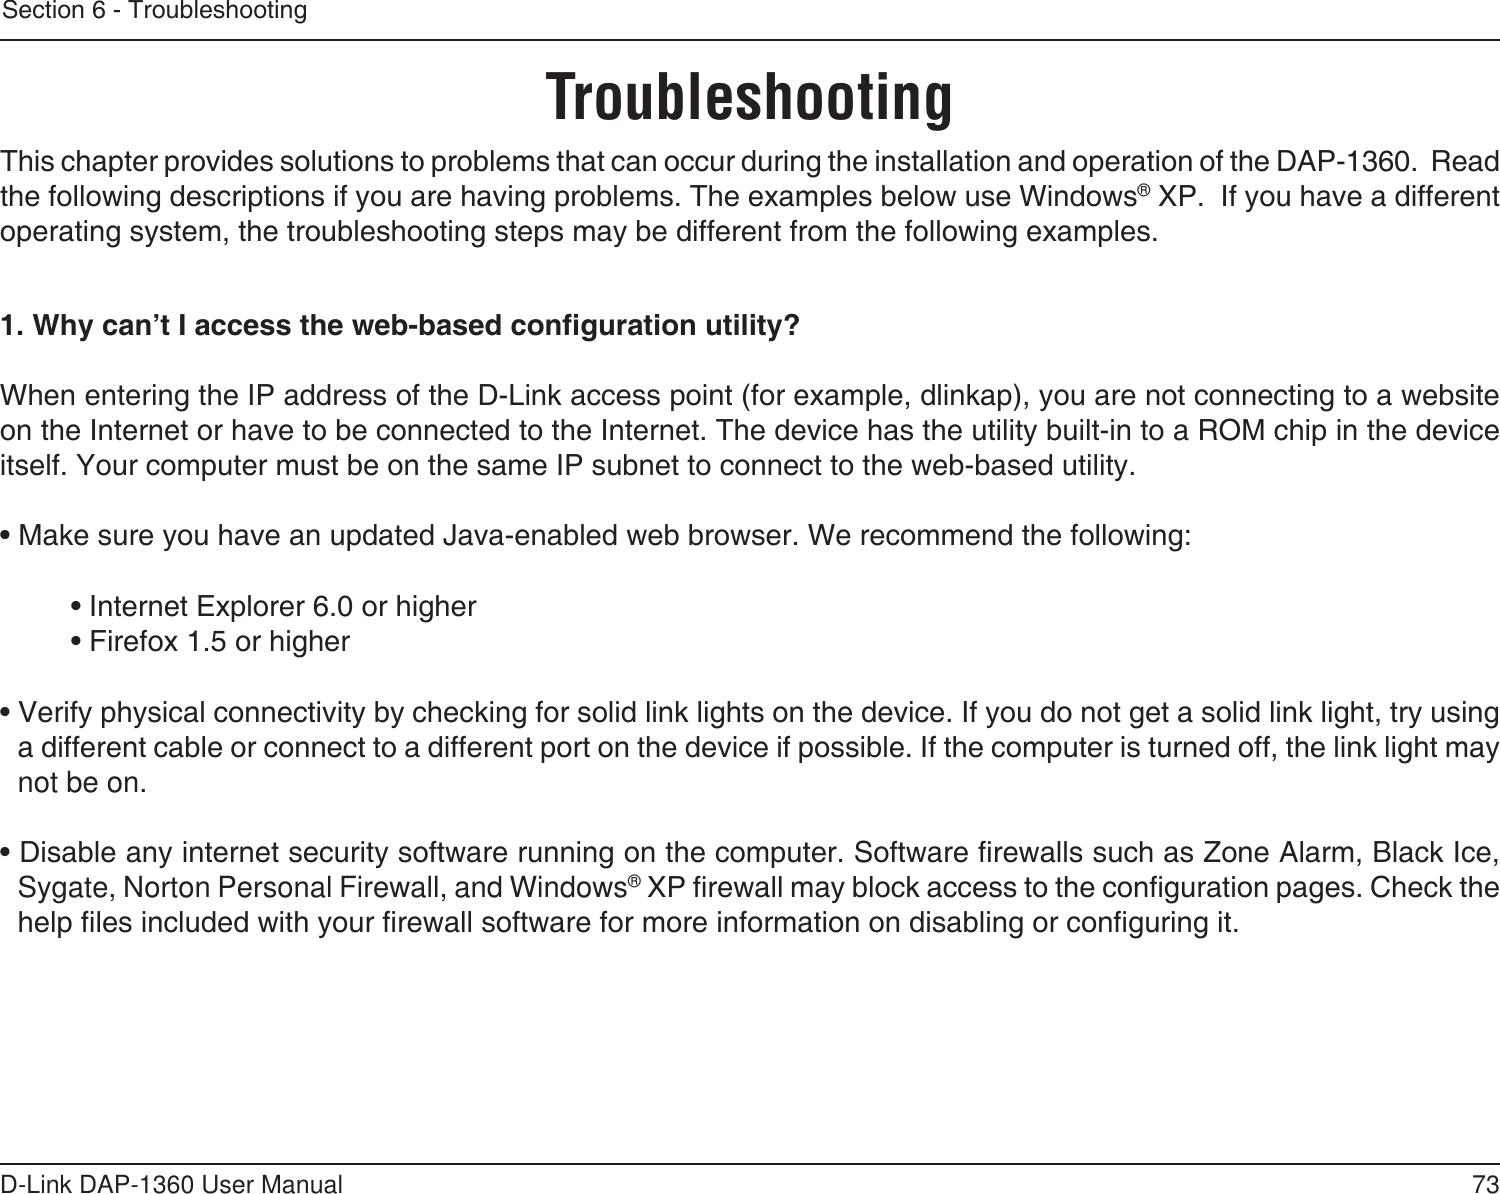 73D-Link DAP-1360 User ManualSection 6 - TroubleshootingTroubleshootingThis chapter provides solutions to problems that can occur during the installation and operation of the DAP-1360.  Read the following descriptions if you are having problems. The examples below use Windows® XP.  If you have a different operating system, the troubleshooting steps may be different from the following examples.1. Why can’t I access the web-based conguration utility?When entering the IP address of the D-Link access point (for example, dlinkap), you are not connecting to a website on the Internet or have to be connected to the Internet. The device has the utility built-in to a ROM chip in the device itself. Your computer must be on the same IP subnet to connect to the web-based utility. • Make sure you have an updated Java-enabled web browser. We recommend the following: • Internet Explorer 6.0 or higher  • Firefox 1.5 or higher • Verify physical connectivity by checking for solid link lights on the device. If you do not get a solid link light, try using a different cable or connect to a different port on the device if possible. If the computer is turned off, the link light may not be on.• Disable any internet security software running on the computer. Software rewalls such as Zone Alarm, Black Ice, Sygate, Norton Personal Firewall, and Windows® XP rewall may block access to the conguration pages. Check the help les included with your rewall software for more information on disabling or conguring it.